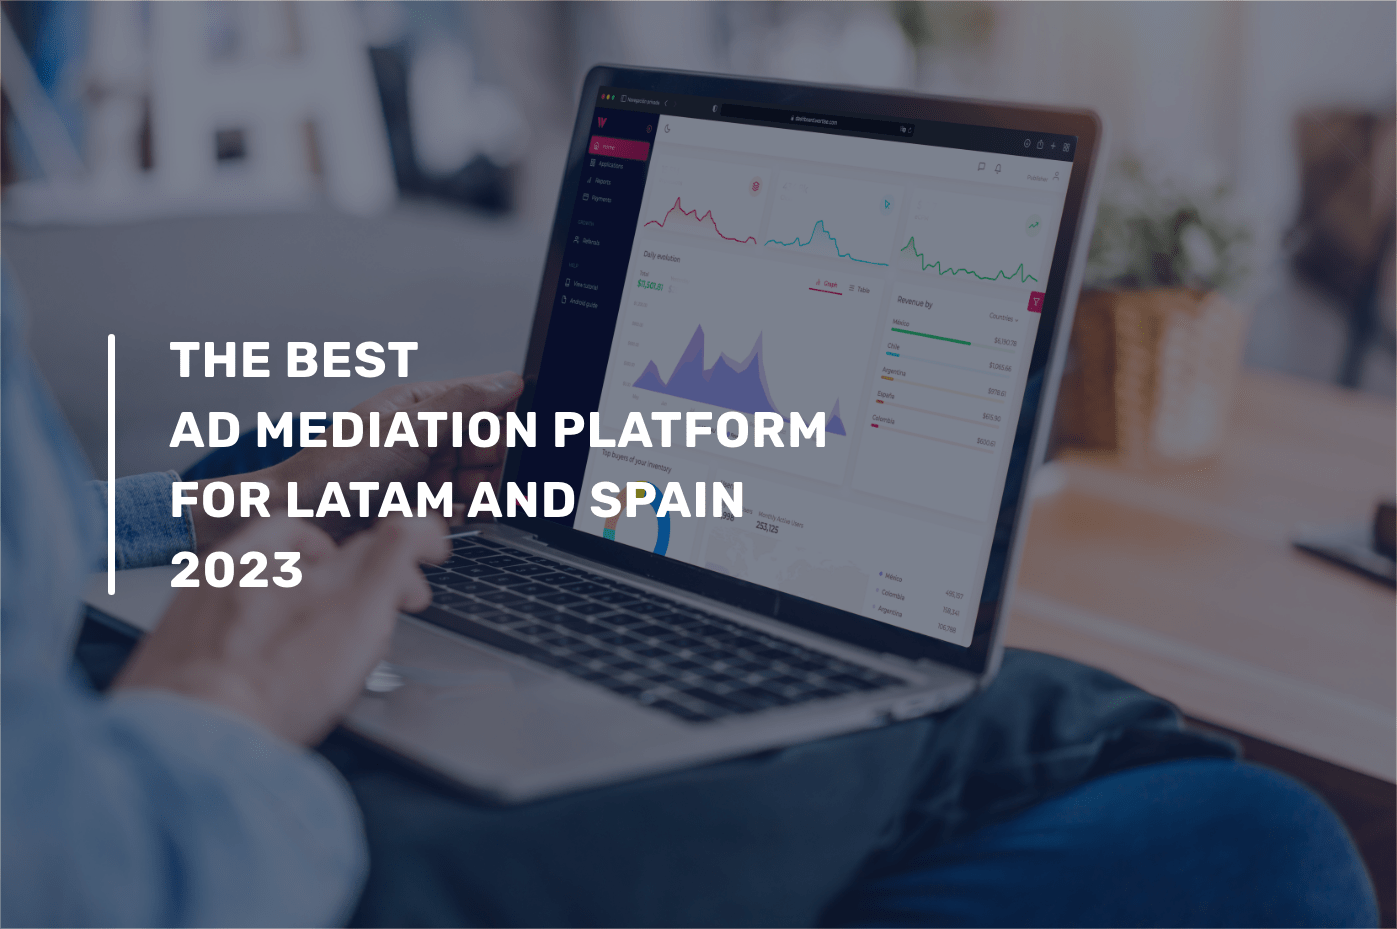 The Best Ad Mediation Platform for LATAM and Spain 2023